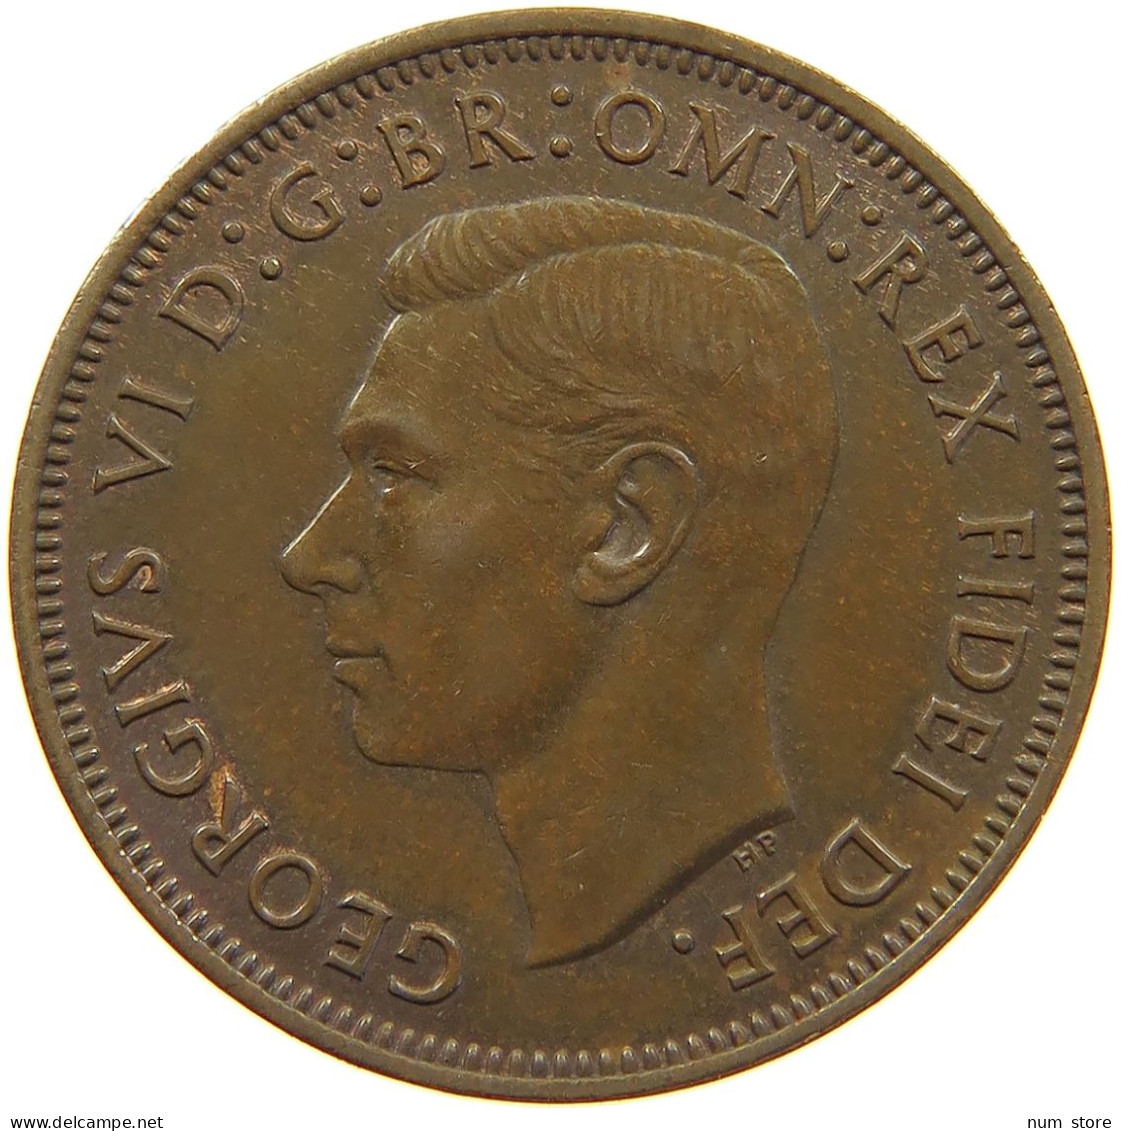 GREAT BRITAIN HALFPENNY 1950 George VI. (1936-1952) #a058 0095 - C. 1/2 Penny